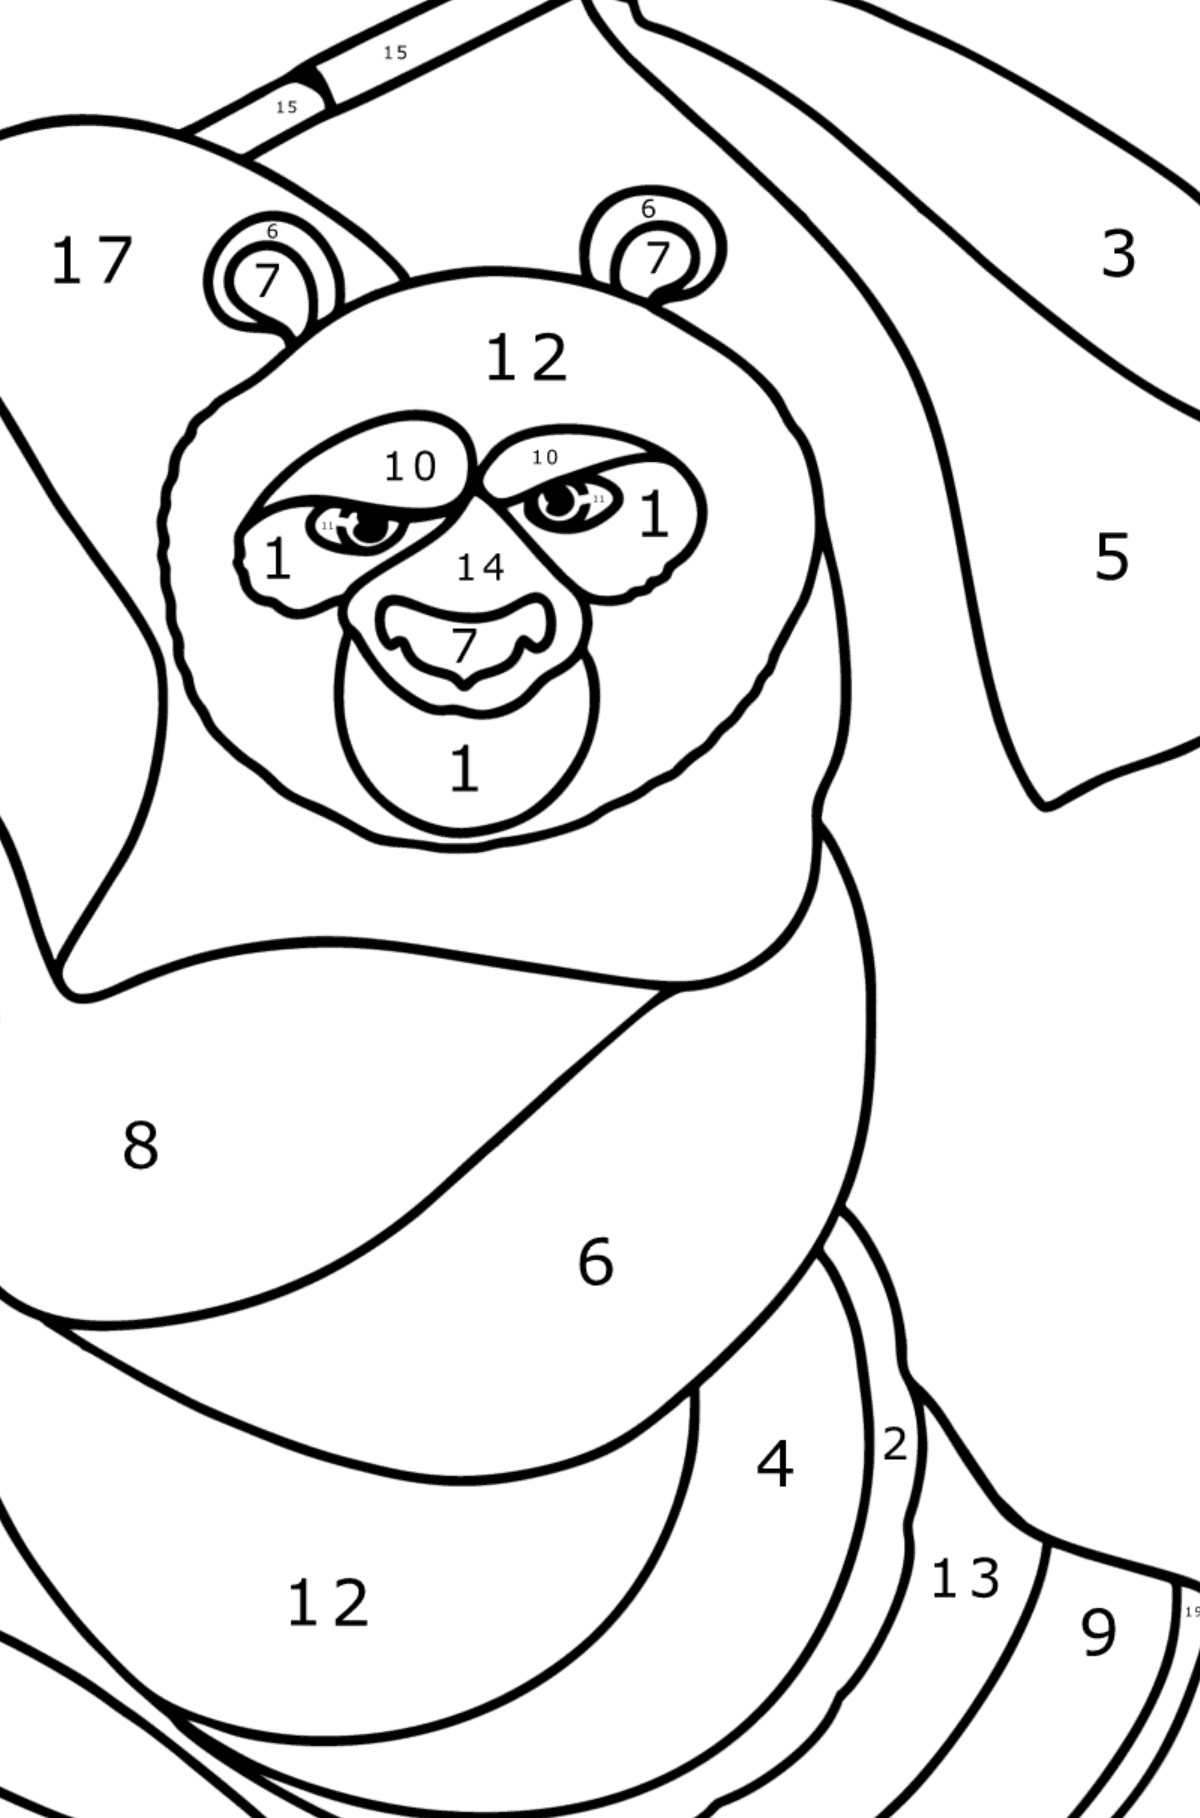 Kung Fu Panda coloring page - Coloring by Numbers for Kids